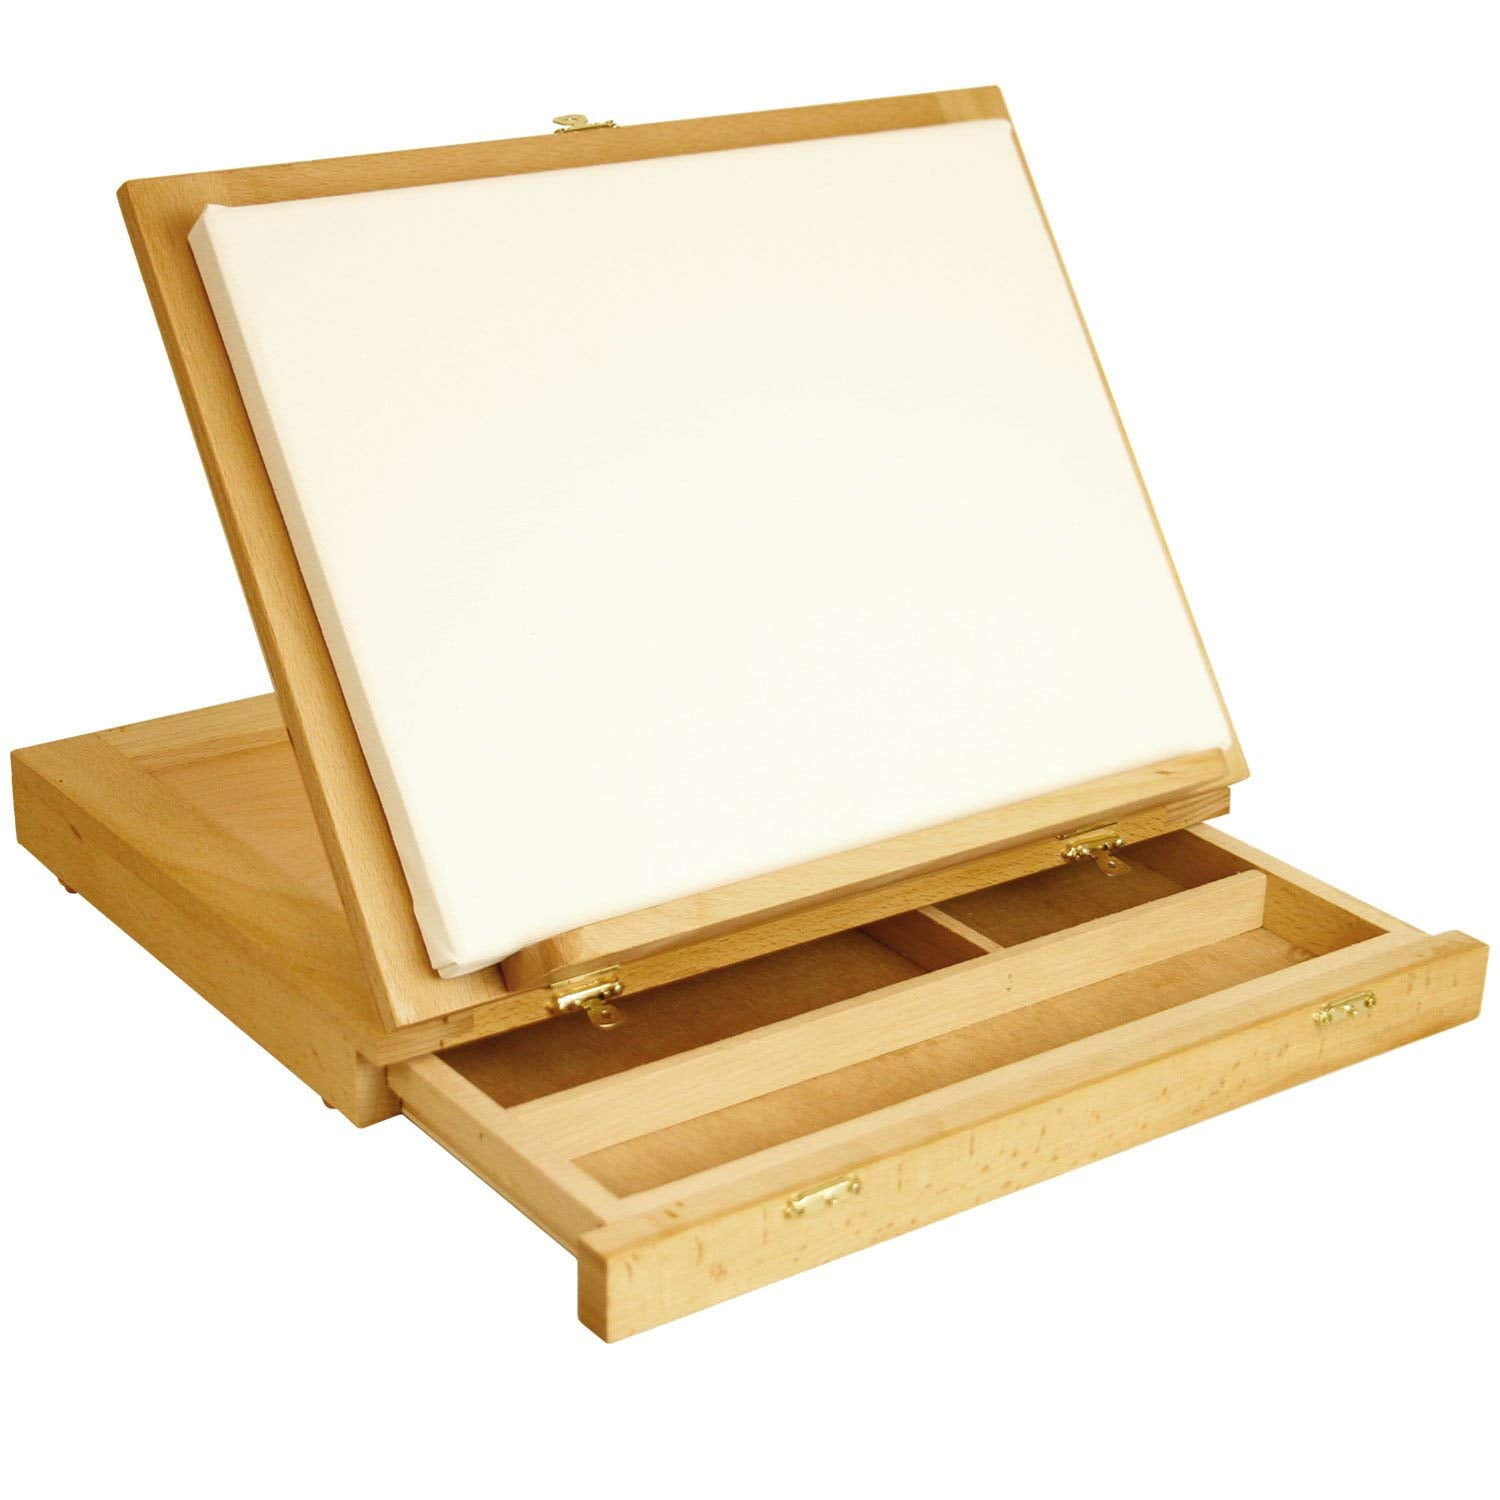 KINGART 741N Tabletop A-Frame Artists Easel, Holds Up to 27 Canvas, Solid  Wood, Folding, Portable and Adjustable, for Painting and Display :  : Home